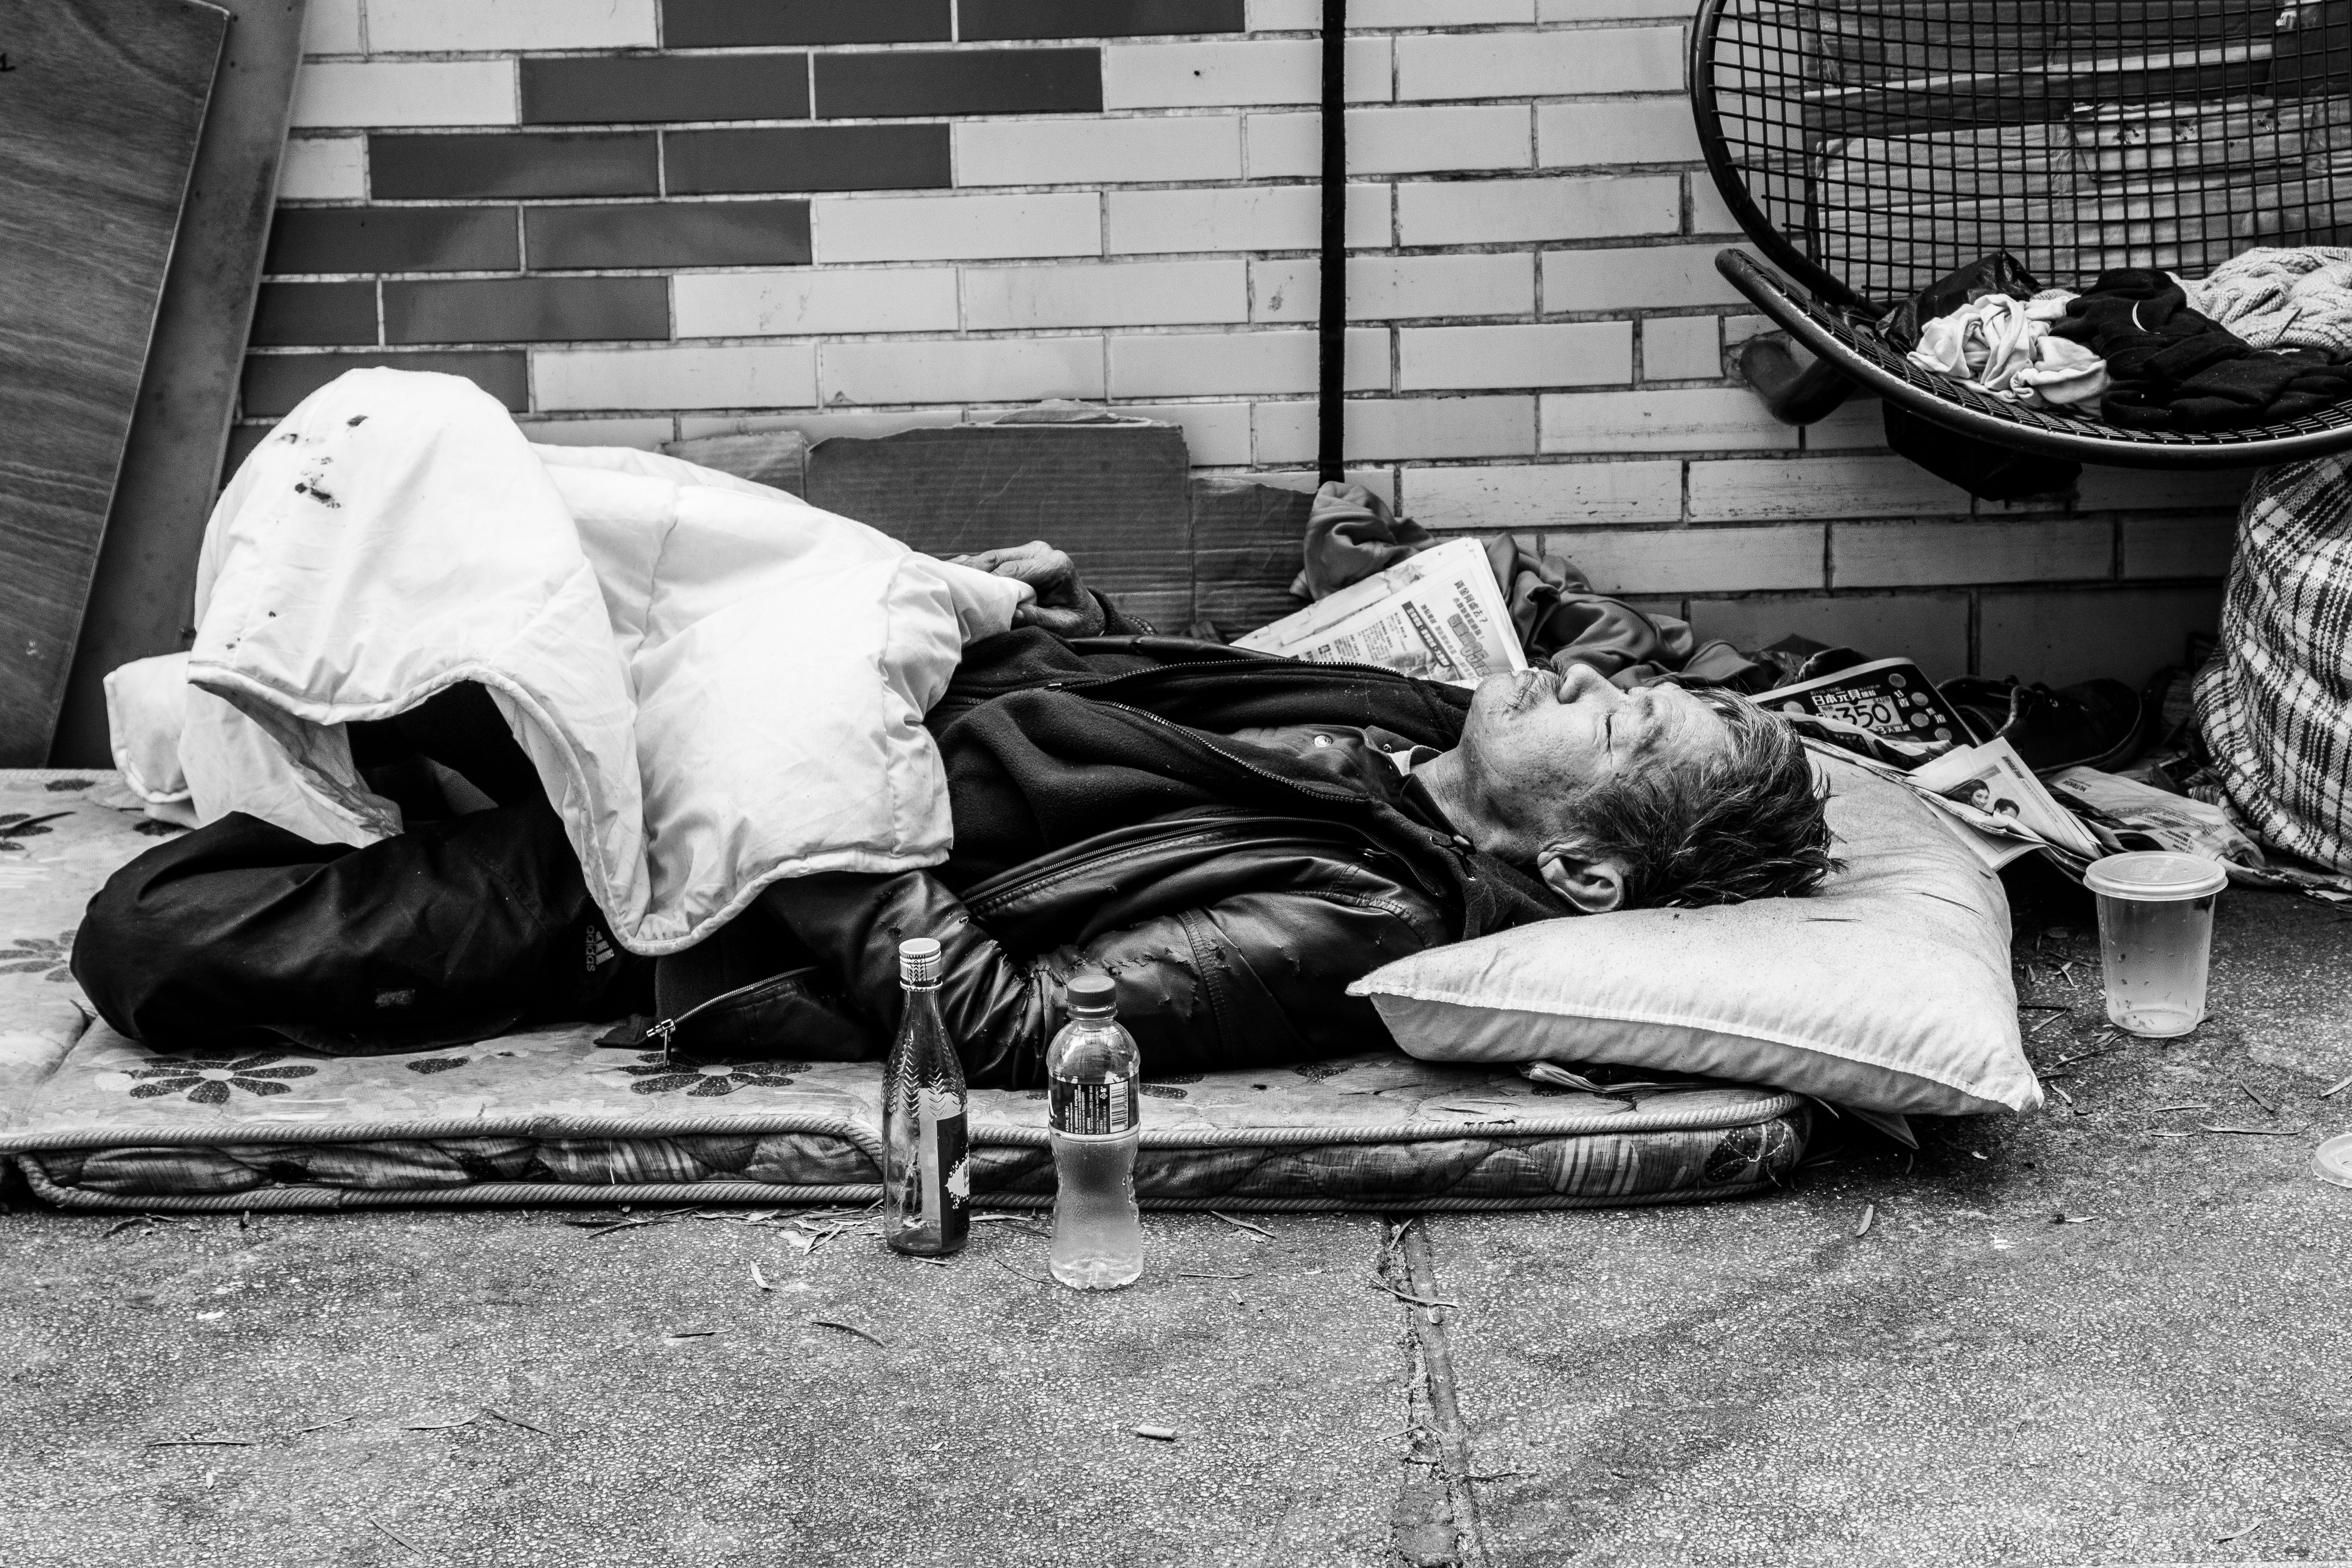 Homelessness is a massive global issue.